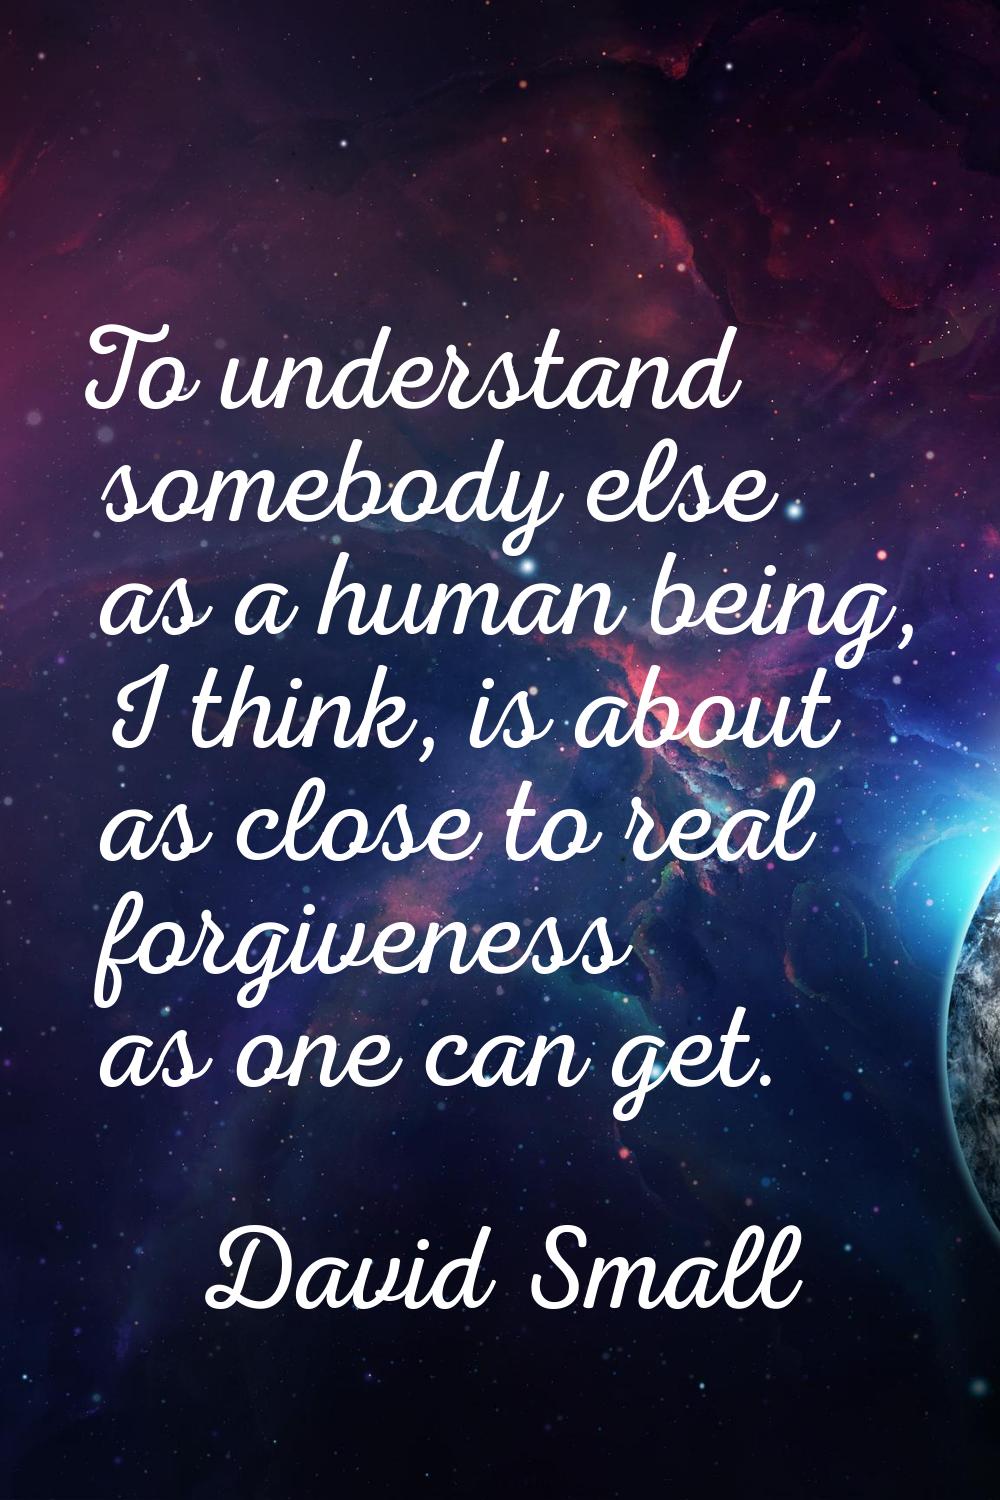 To understand somebody else as a human being, I think, is about as close to real forgiveness as one